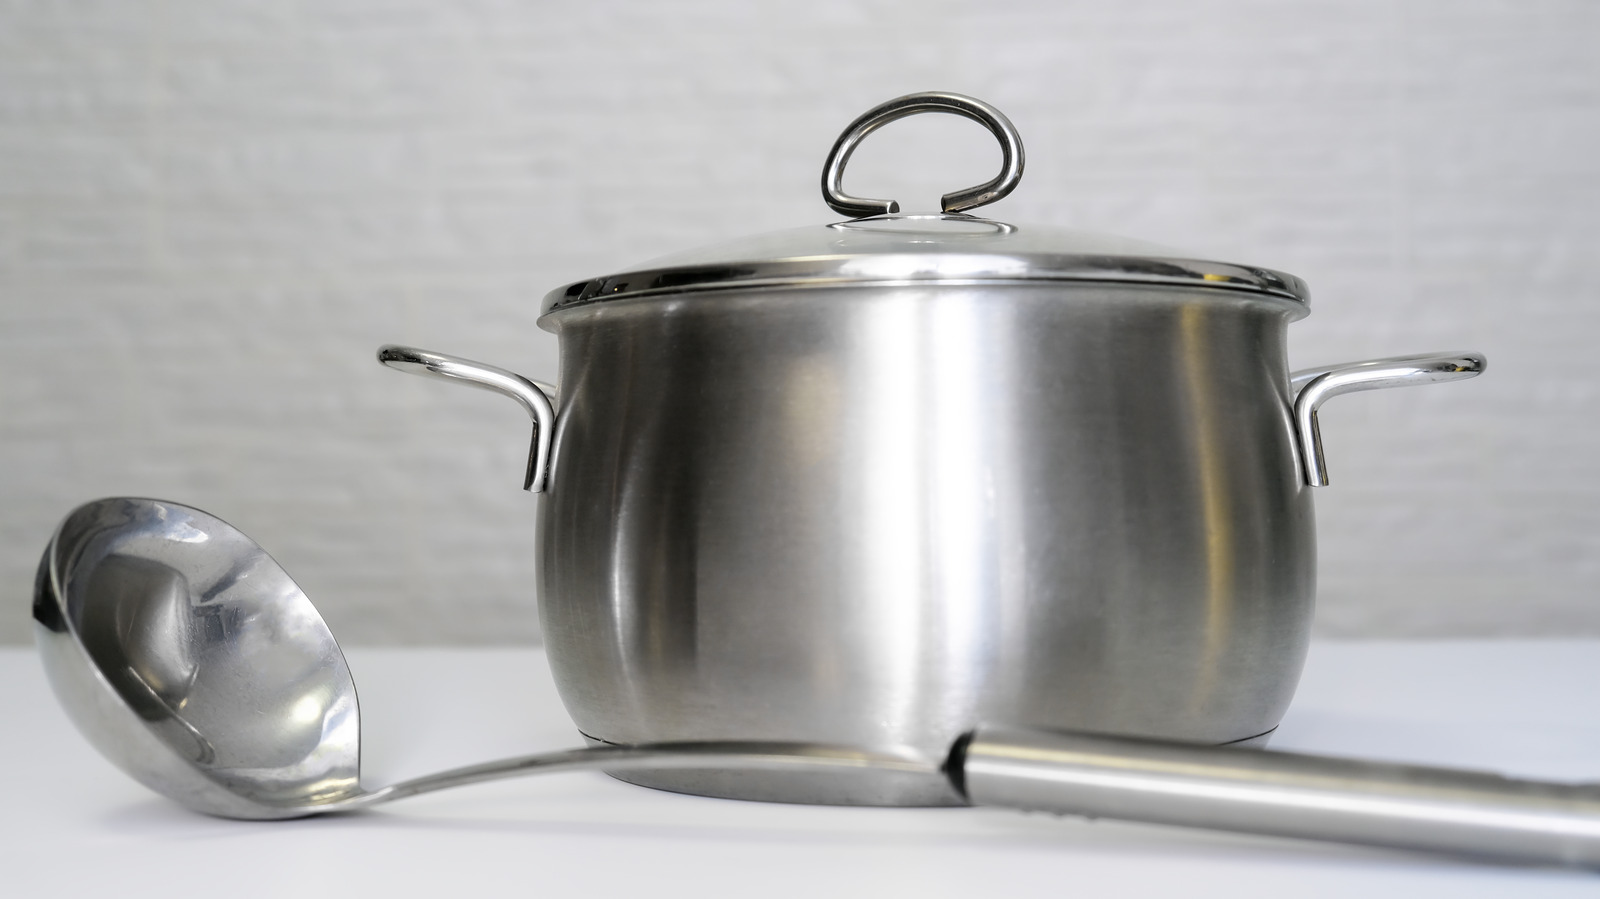 The Best Stockpots To Ready Your Kitchen for Soup Season